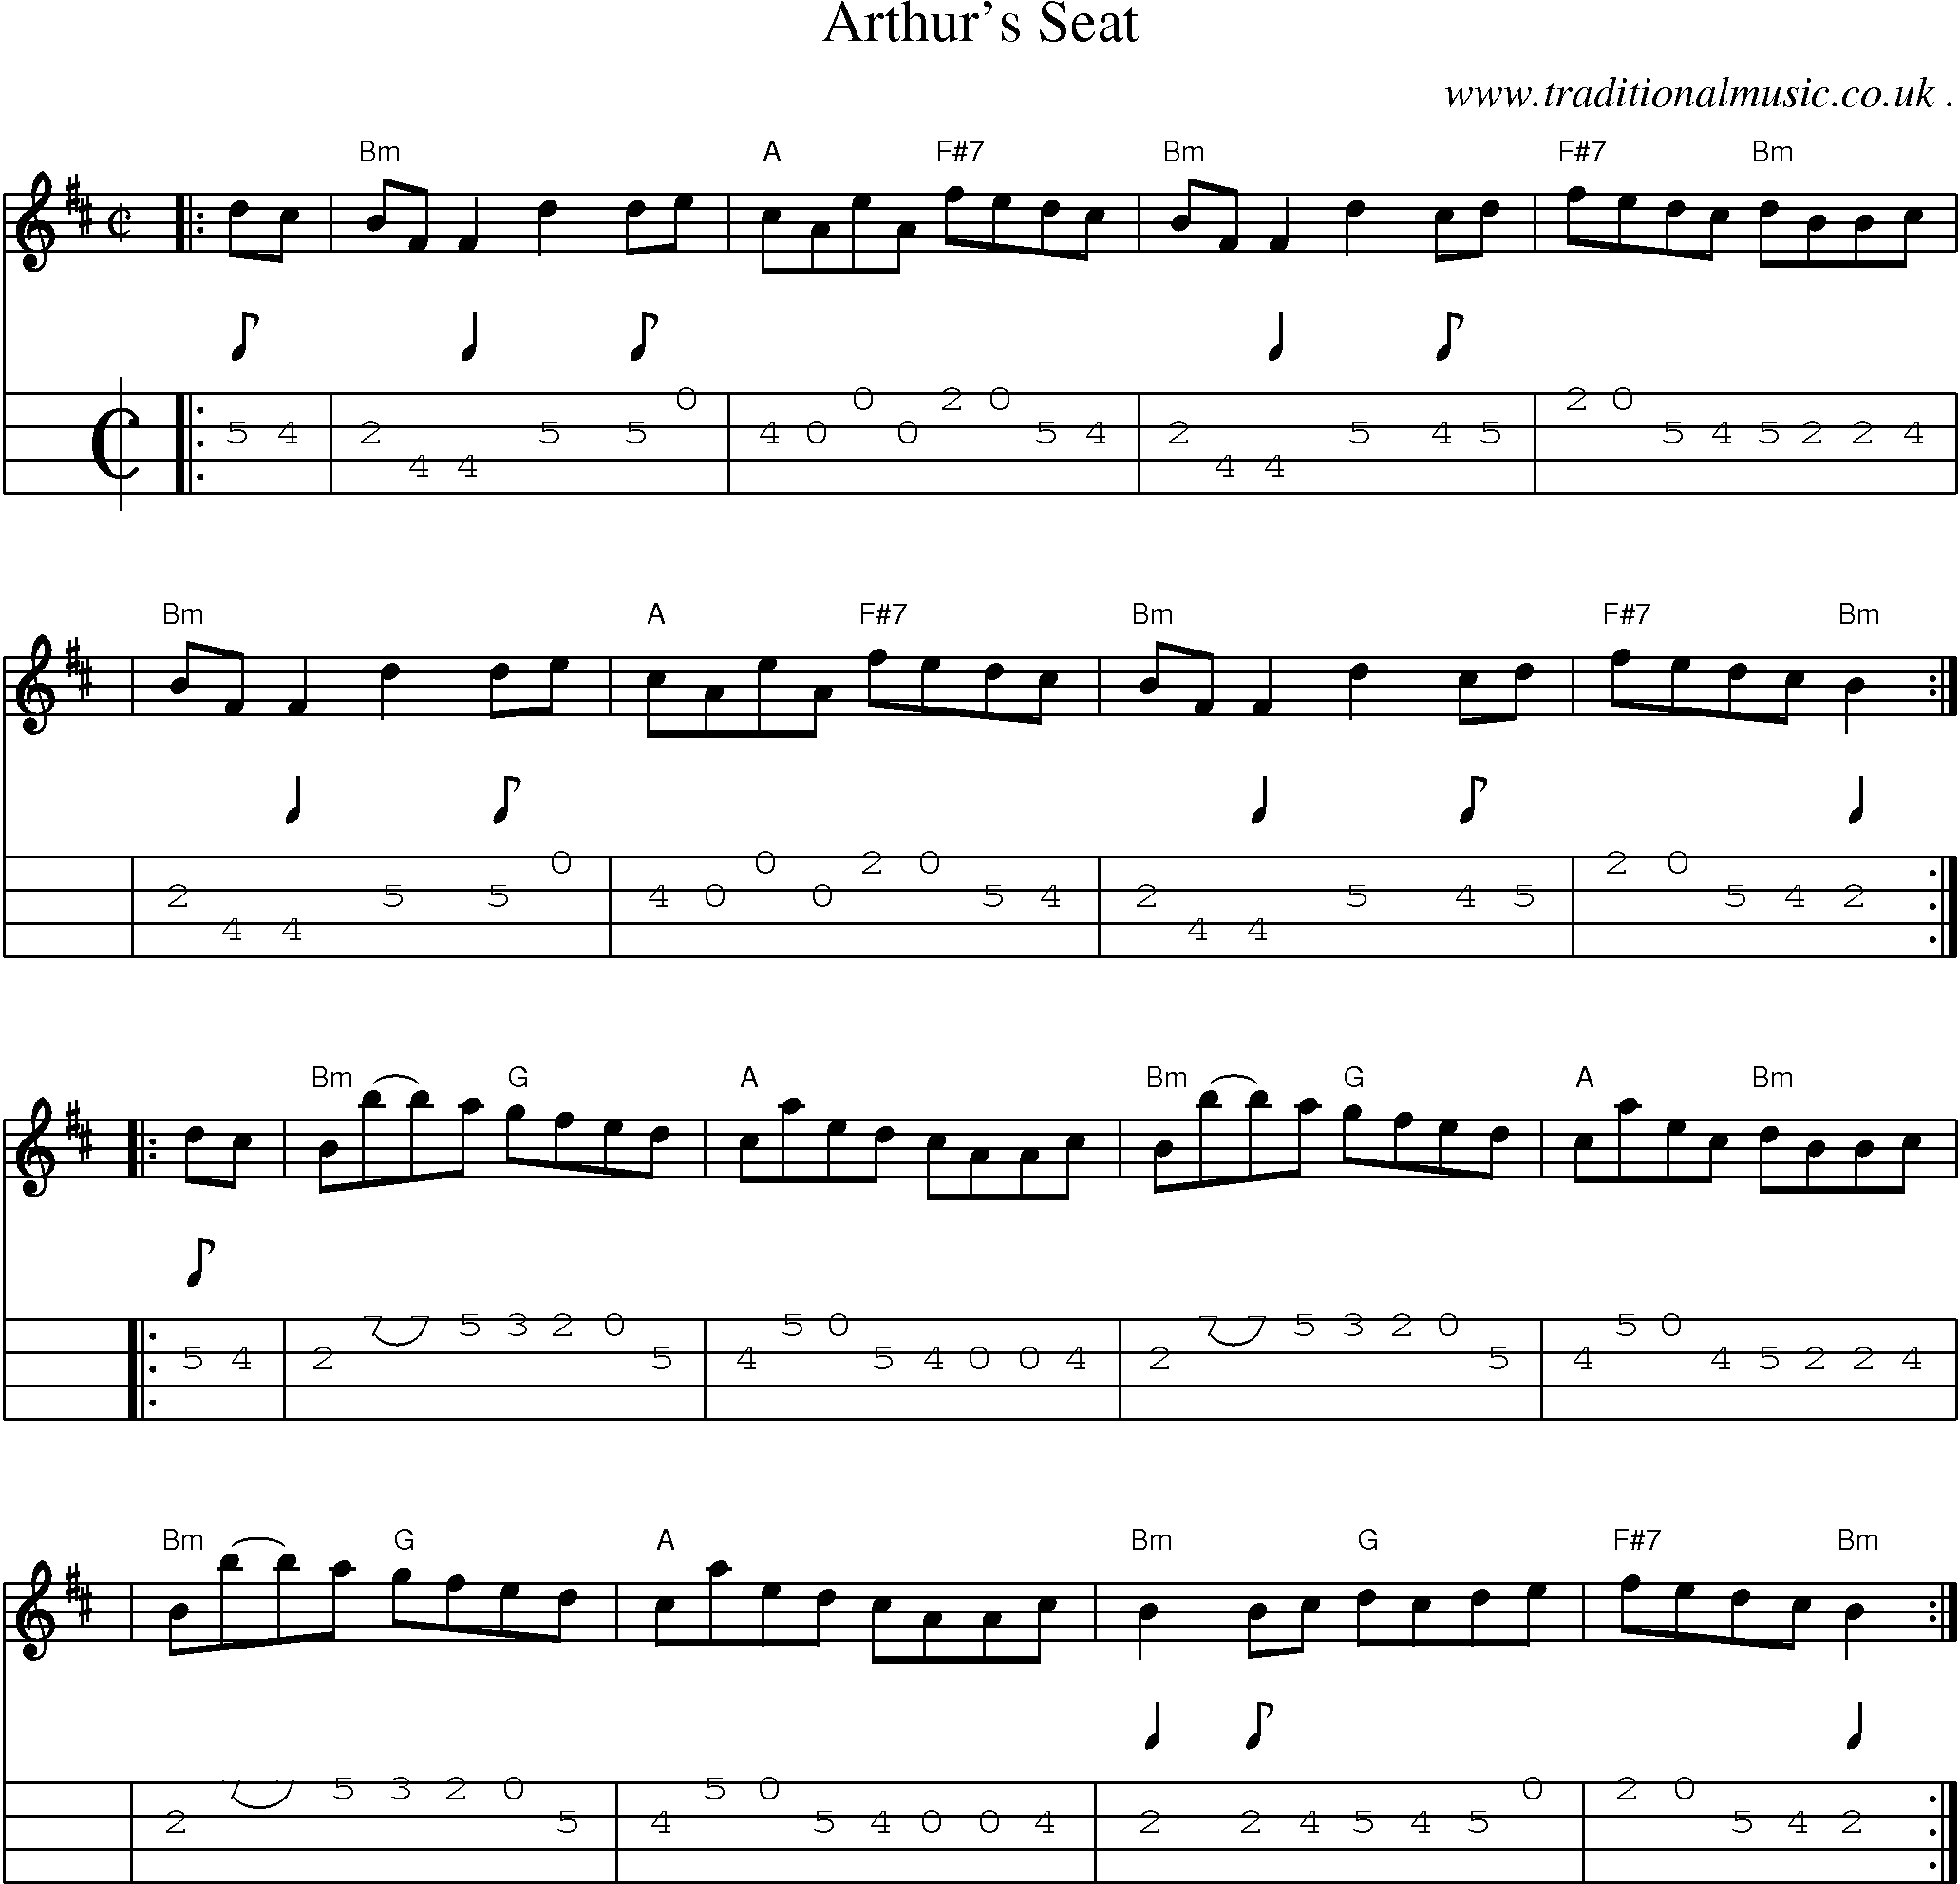 Sheet-music  score, Chords and Mandolin Tabs for Arthurs Seat